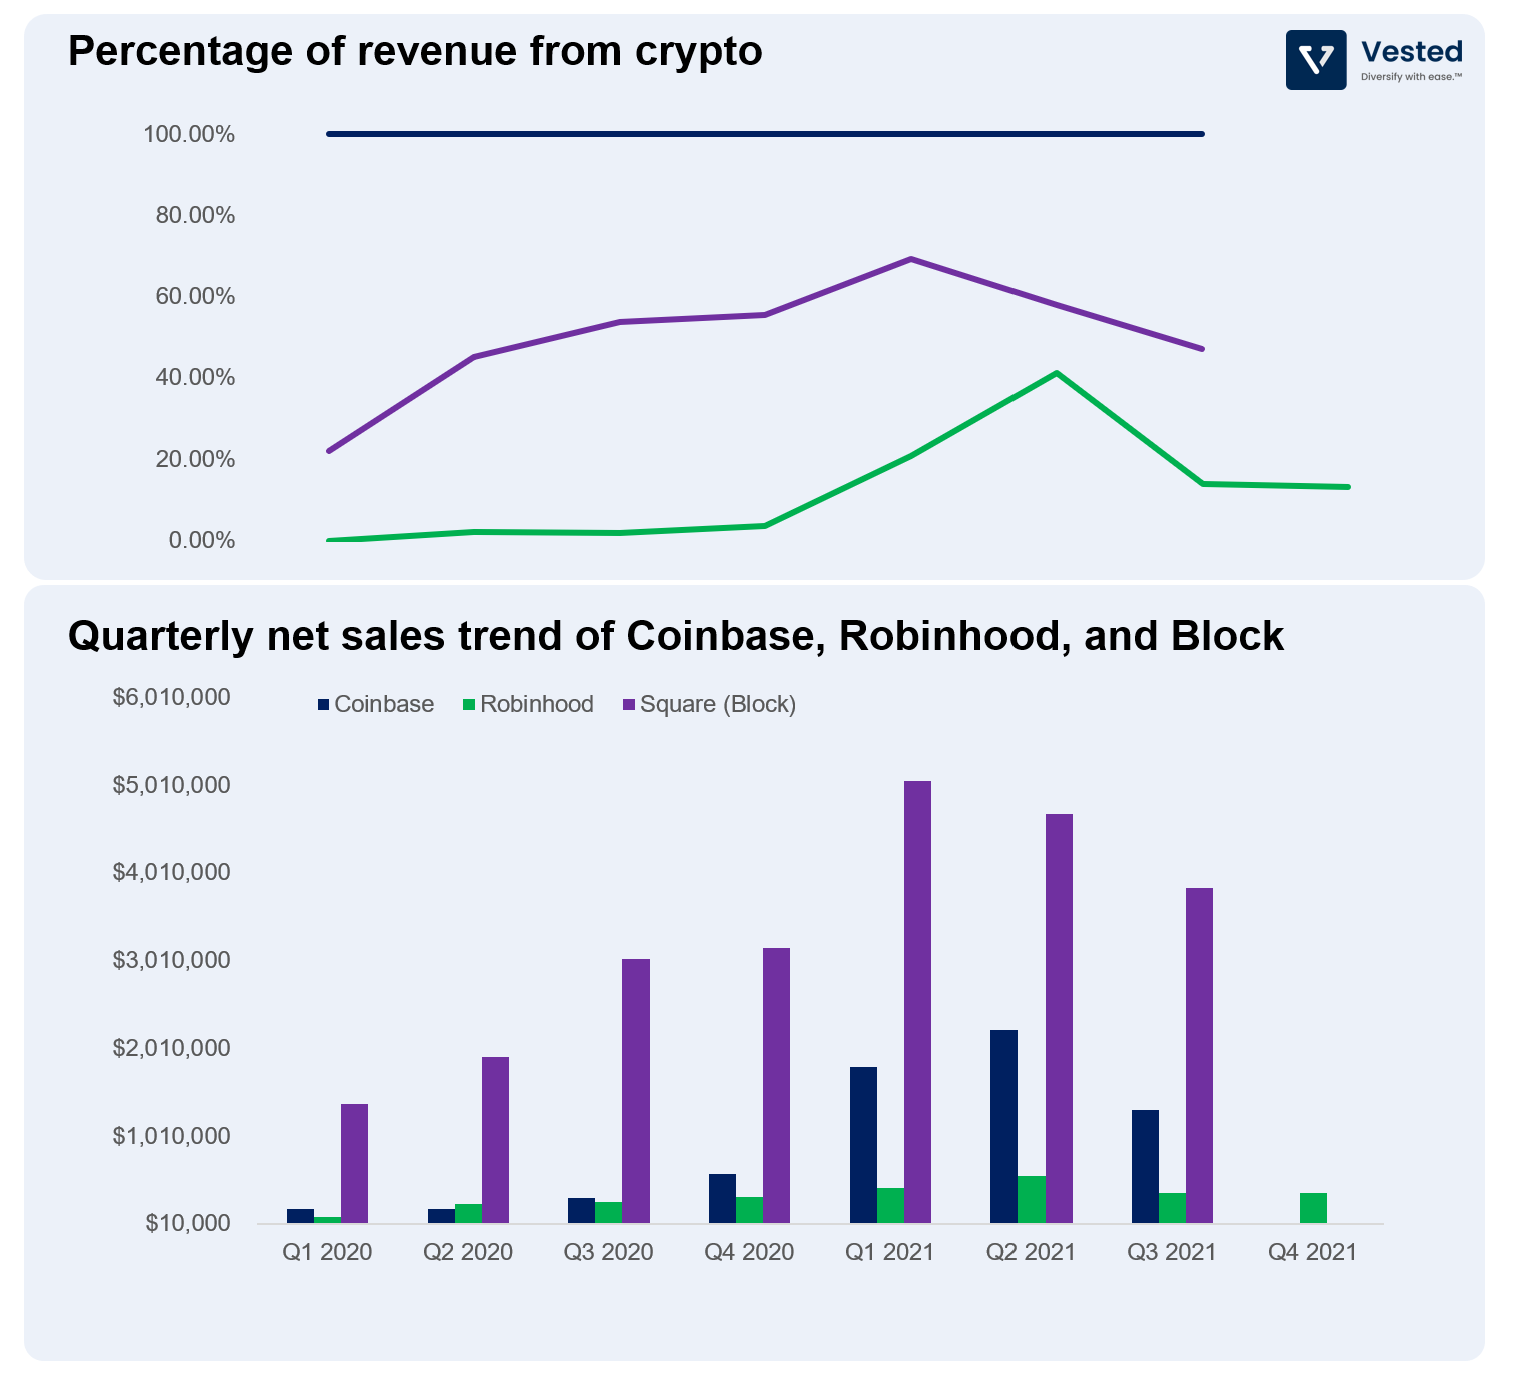 Crypto revenue of Coinbase, Robinhood, and Square. Data is from the respective companies